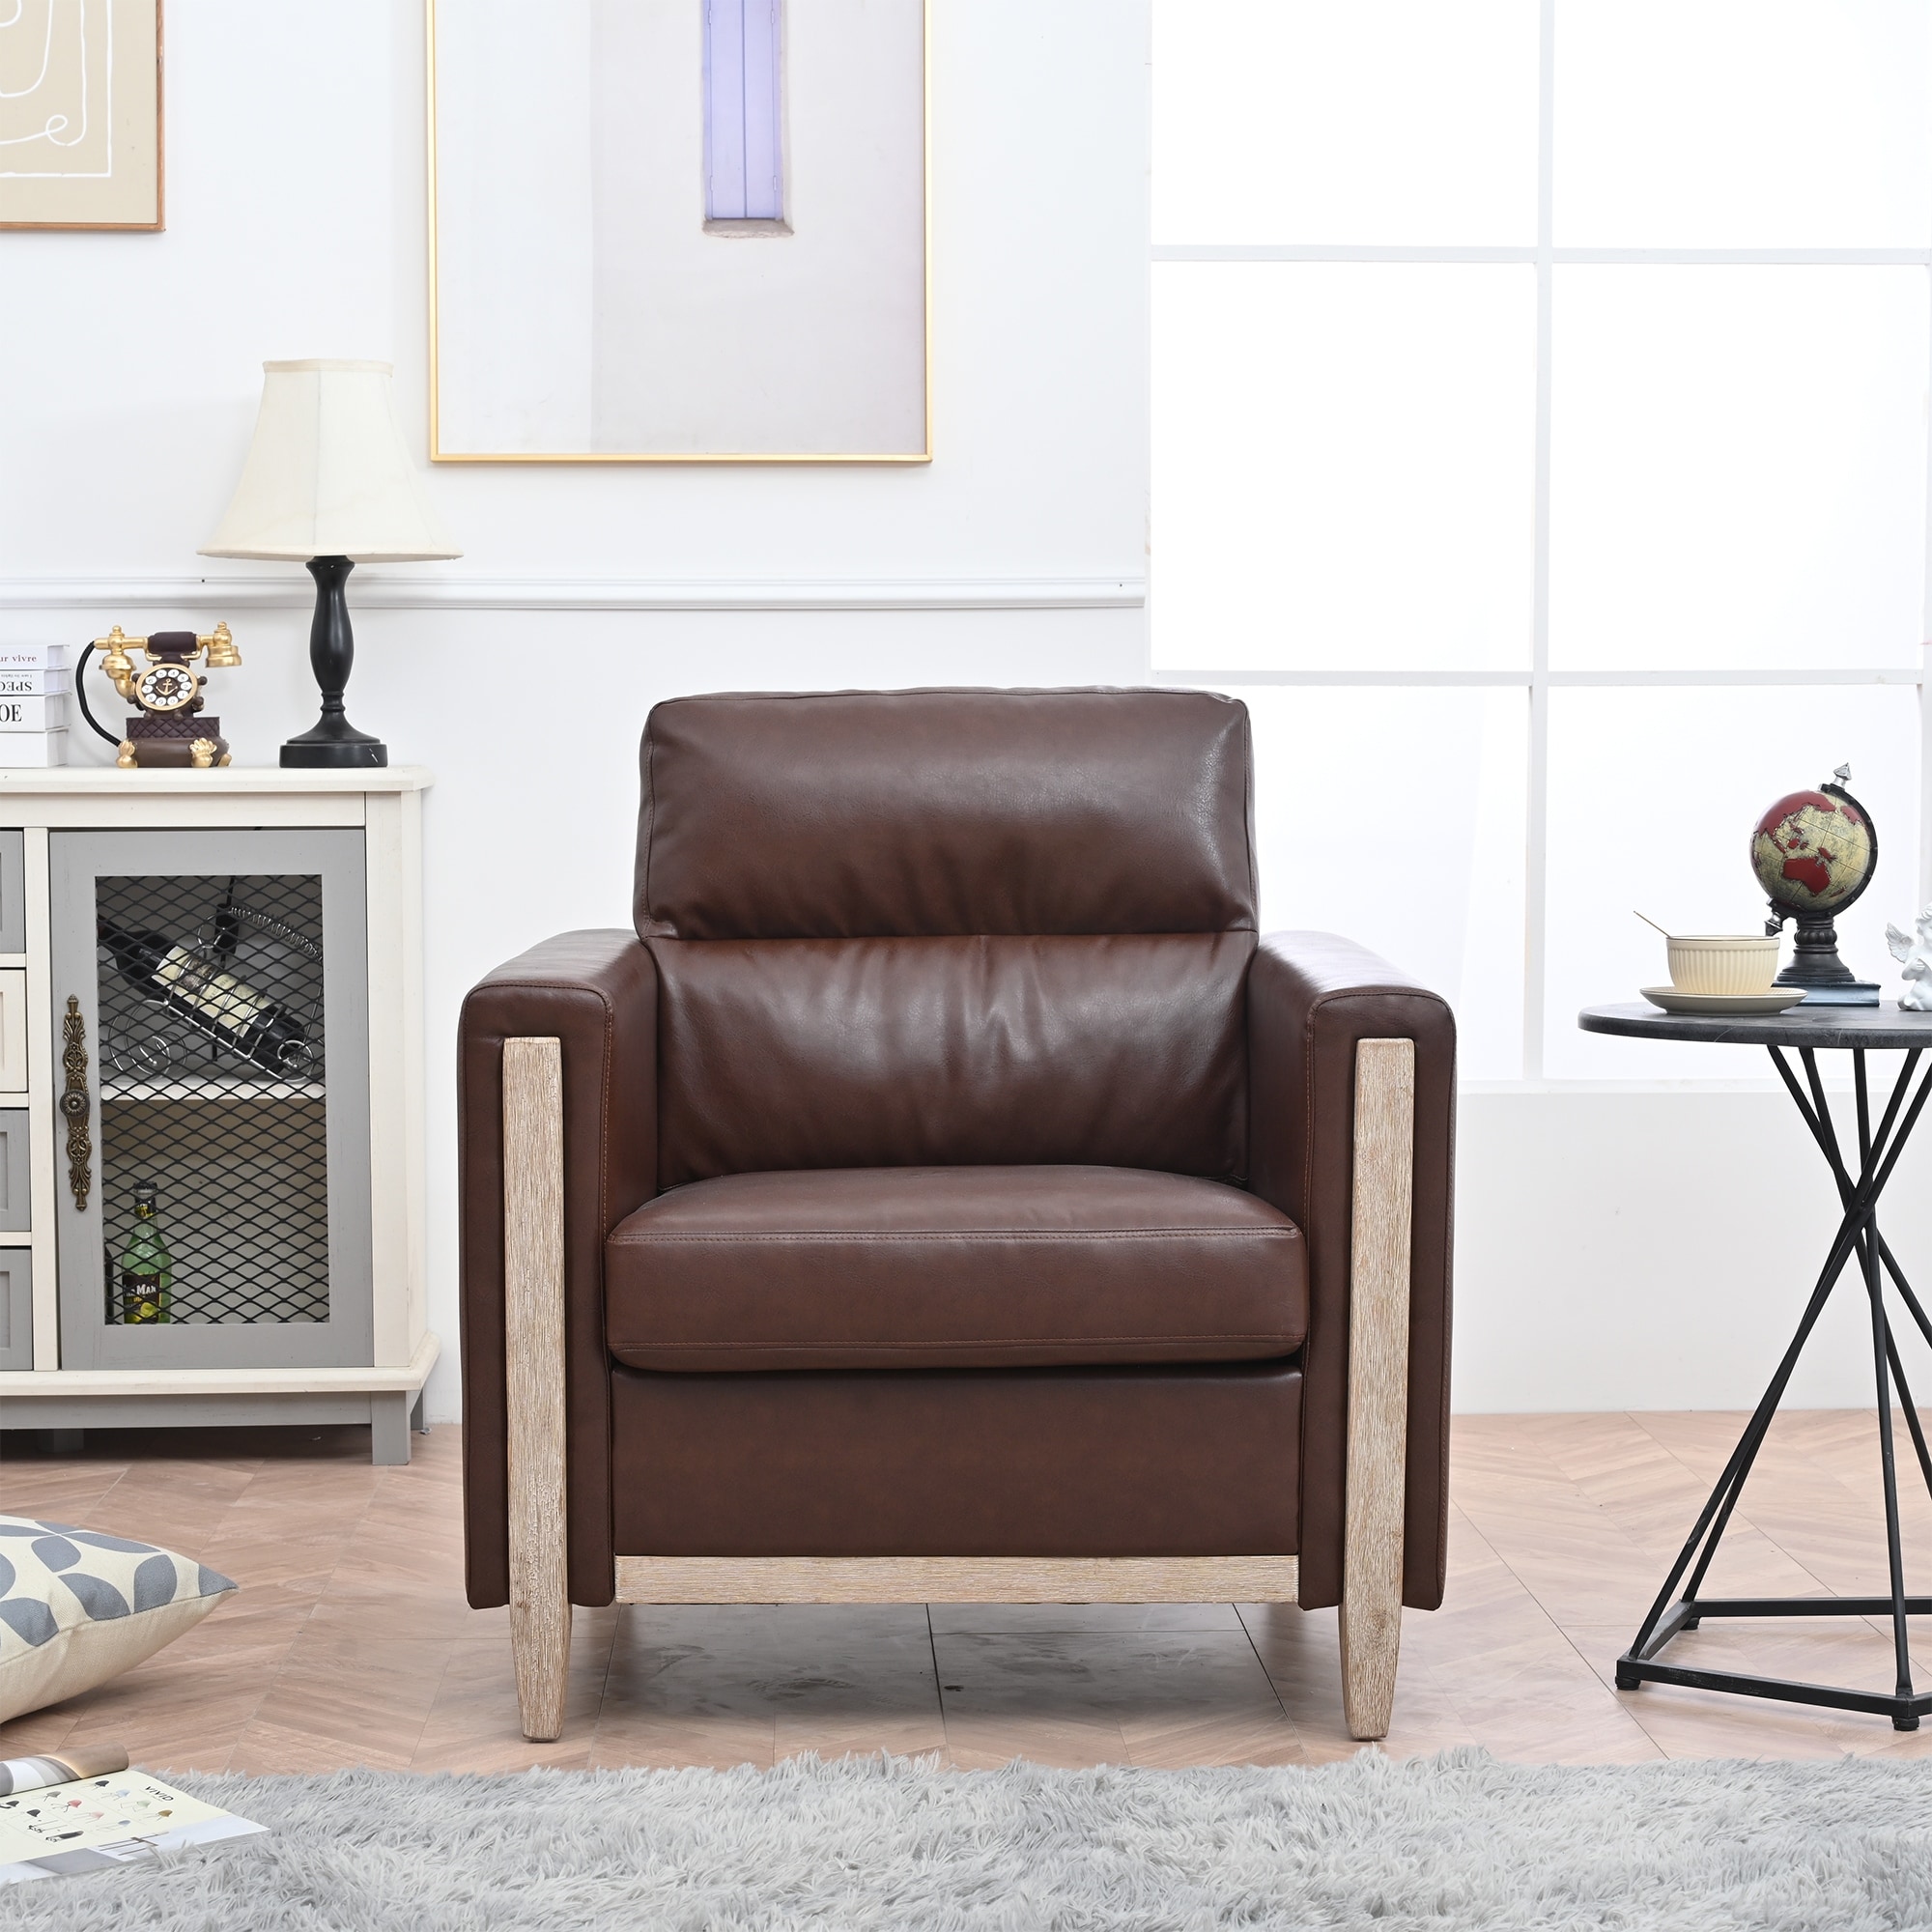 One Seater Leather Upholstered Sofa Chair  Modern Home Leisure Single Seating With Seat Cushion And Imported Rubber Wood Legs